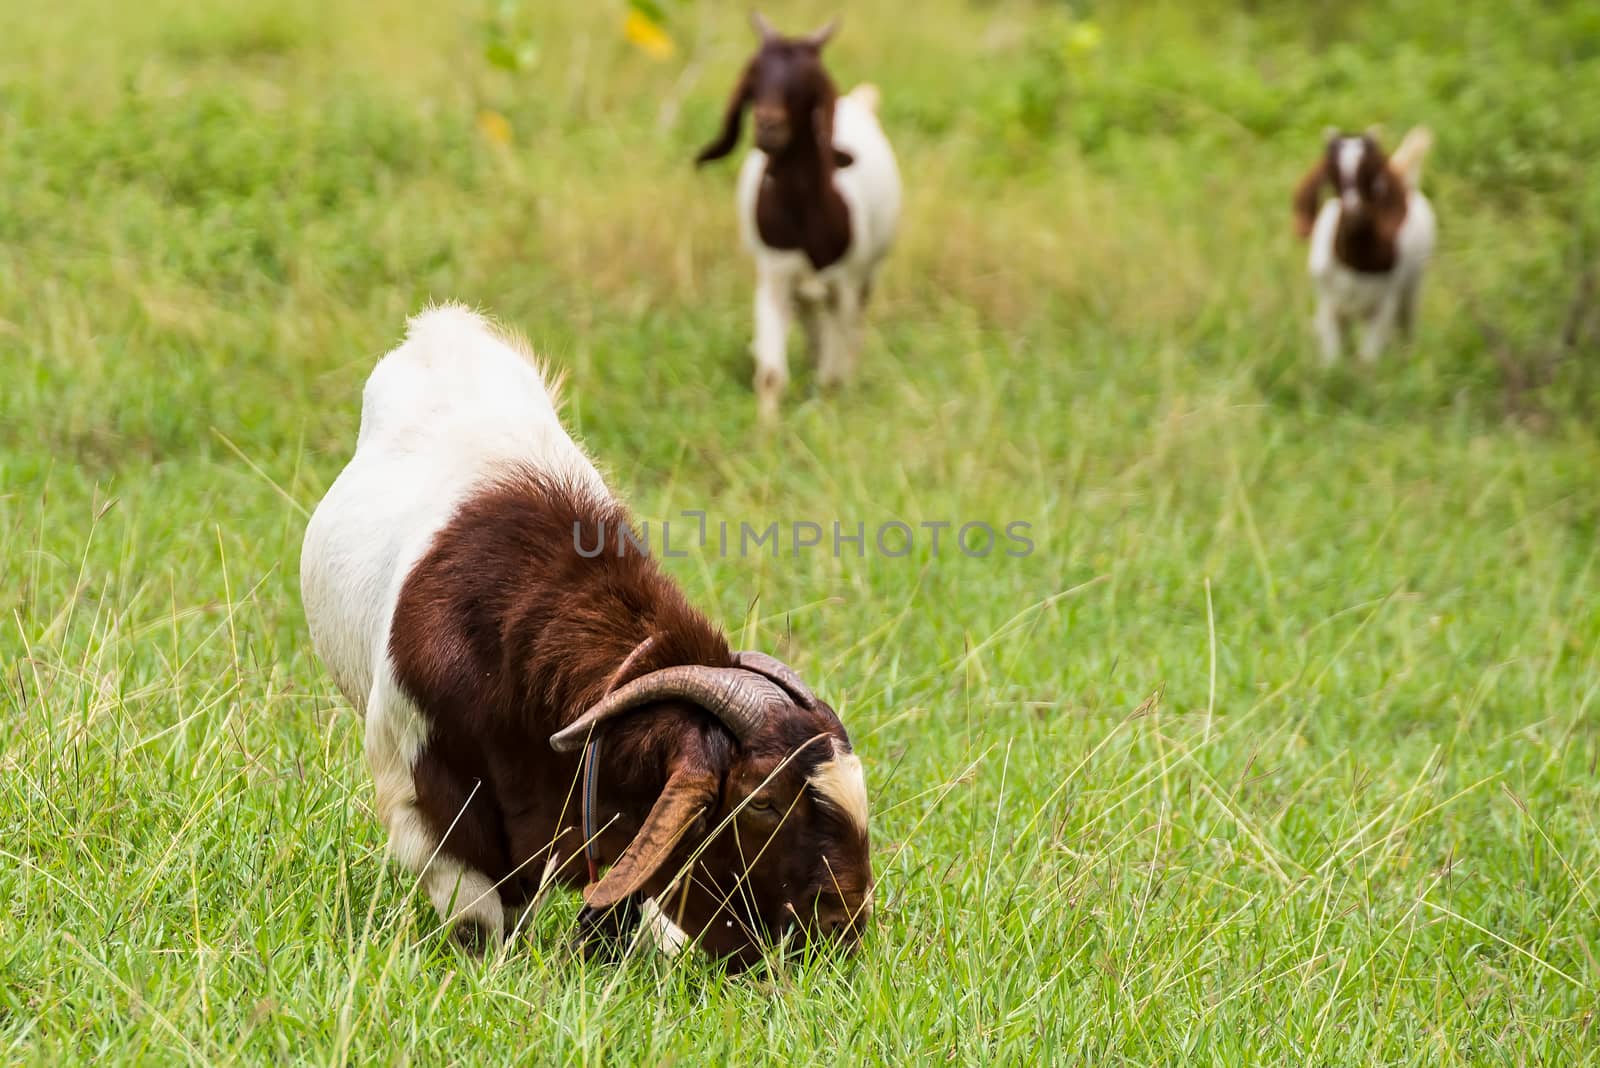 Goats in the pasture of organic farm in thailand. by Bubbers